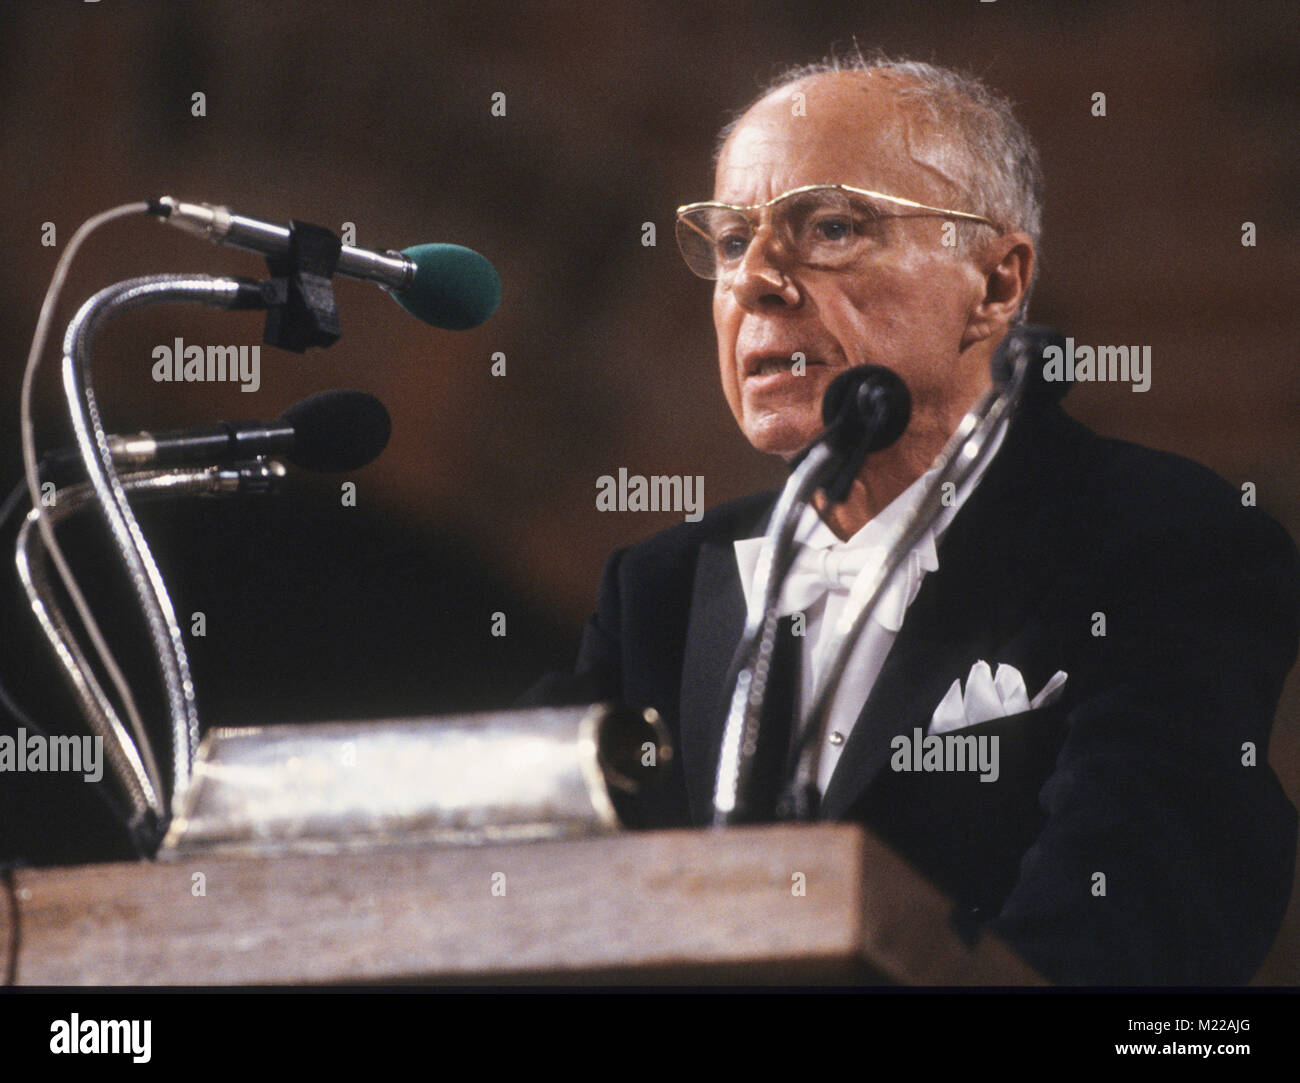 CLAUDE SIMON French author and Nobel Laureate 1985 keeps his thanks at the Nobel dinner Stock Photo